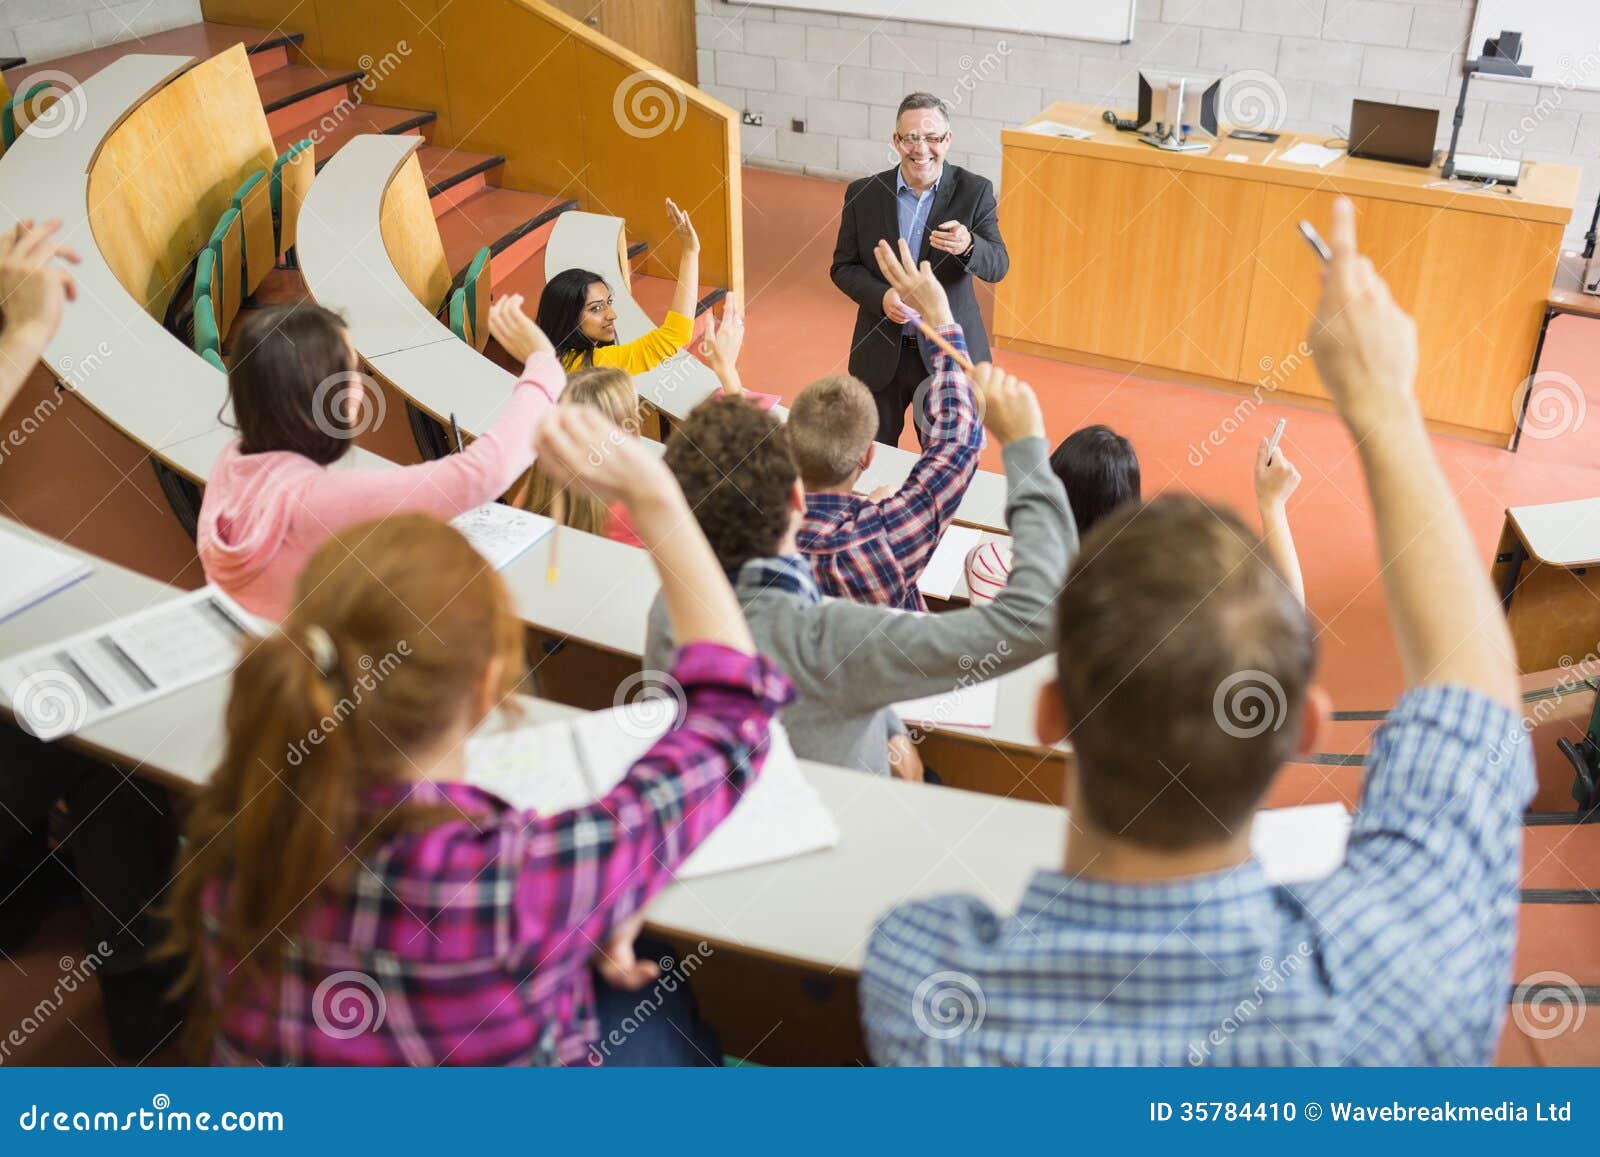 students raising hands with teacher in the lecture hall